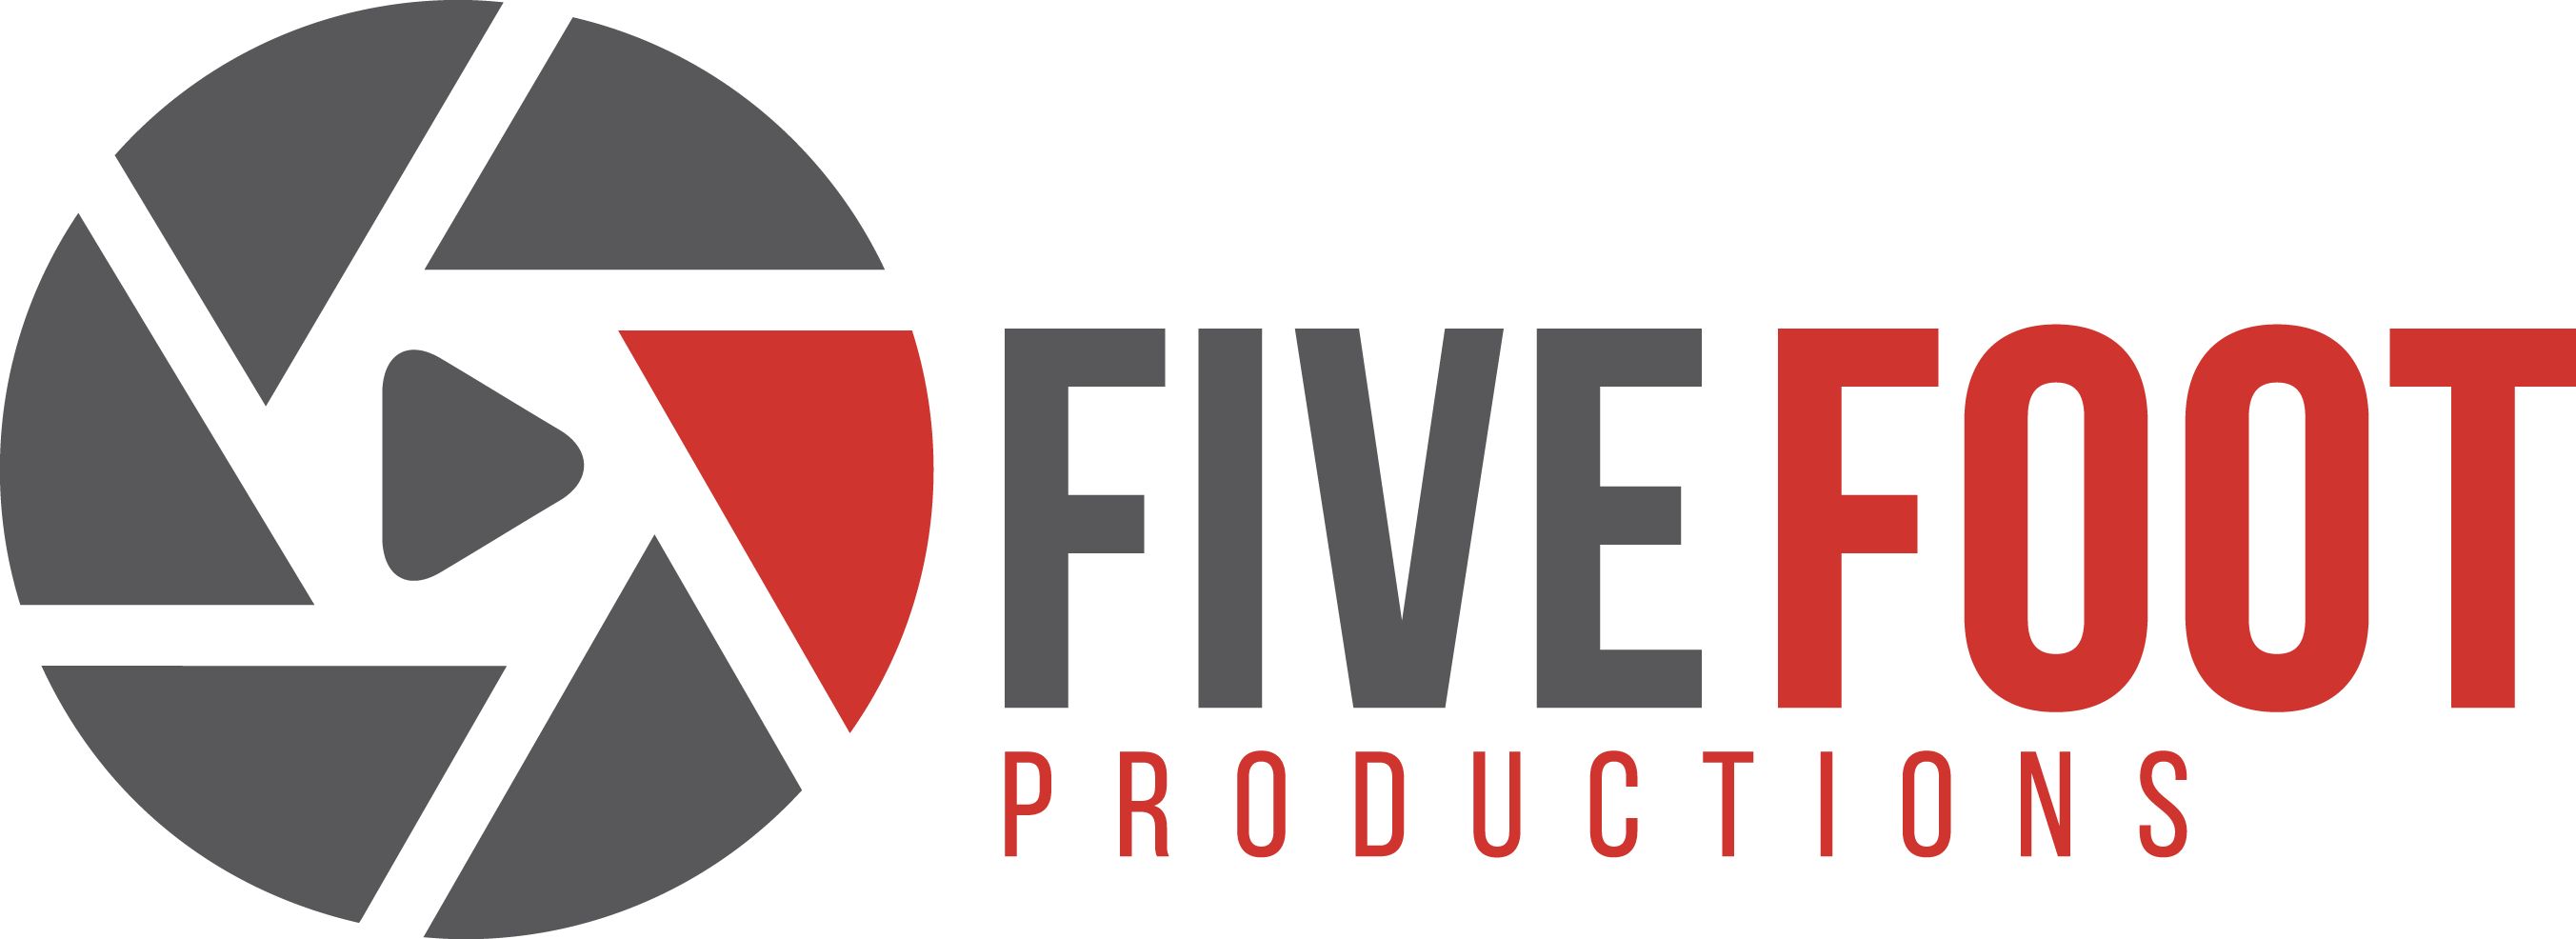 Five Foot Productions